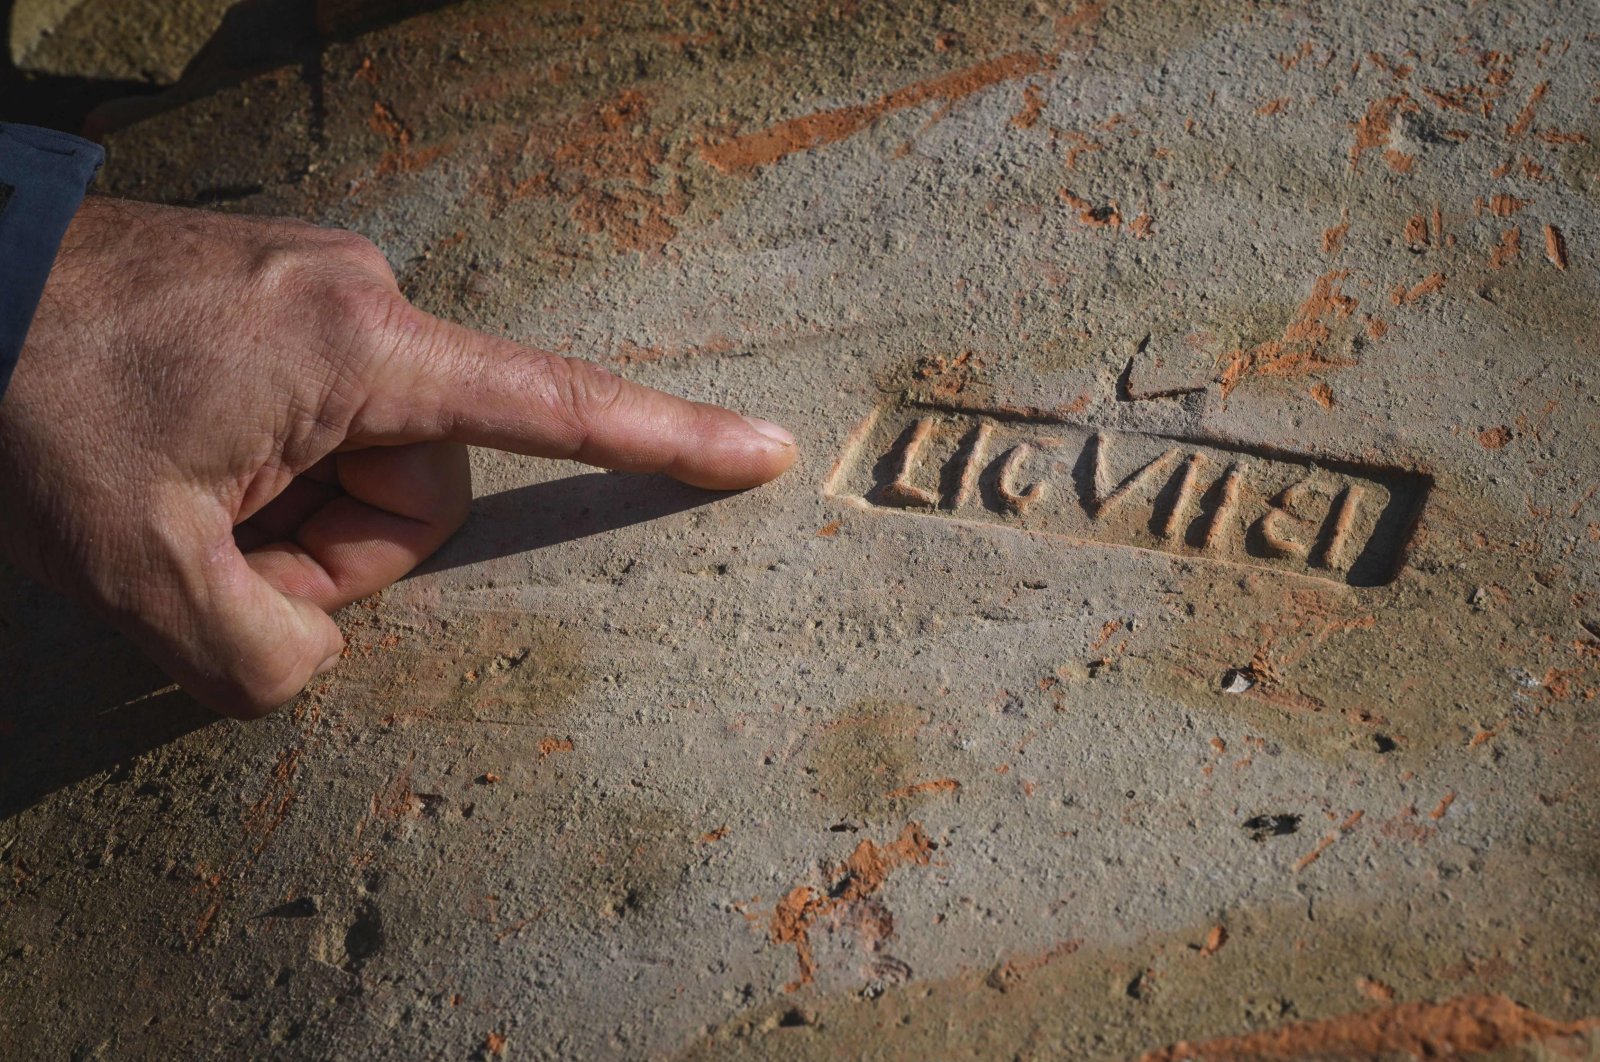 Dragan Jacanovic, an archeologist from the Museum of Pozarevac, points to a brick with Roman stamps on it in Stari Kostolac, Serbia, Dec. 3, 2021. (AFP Photo)